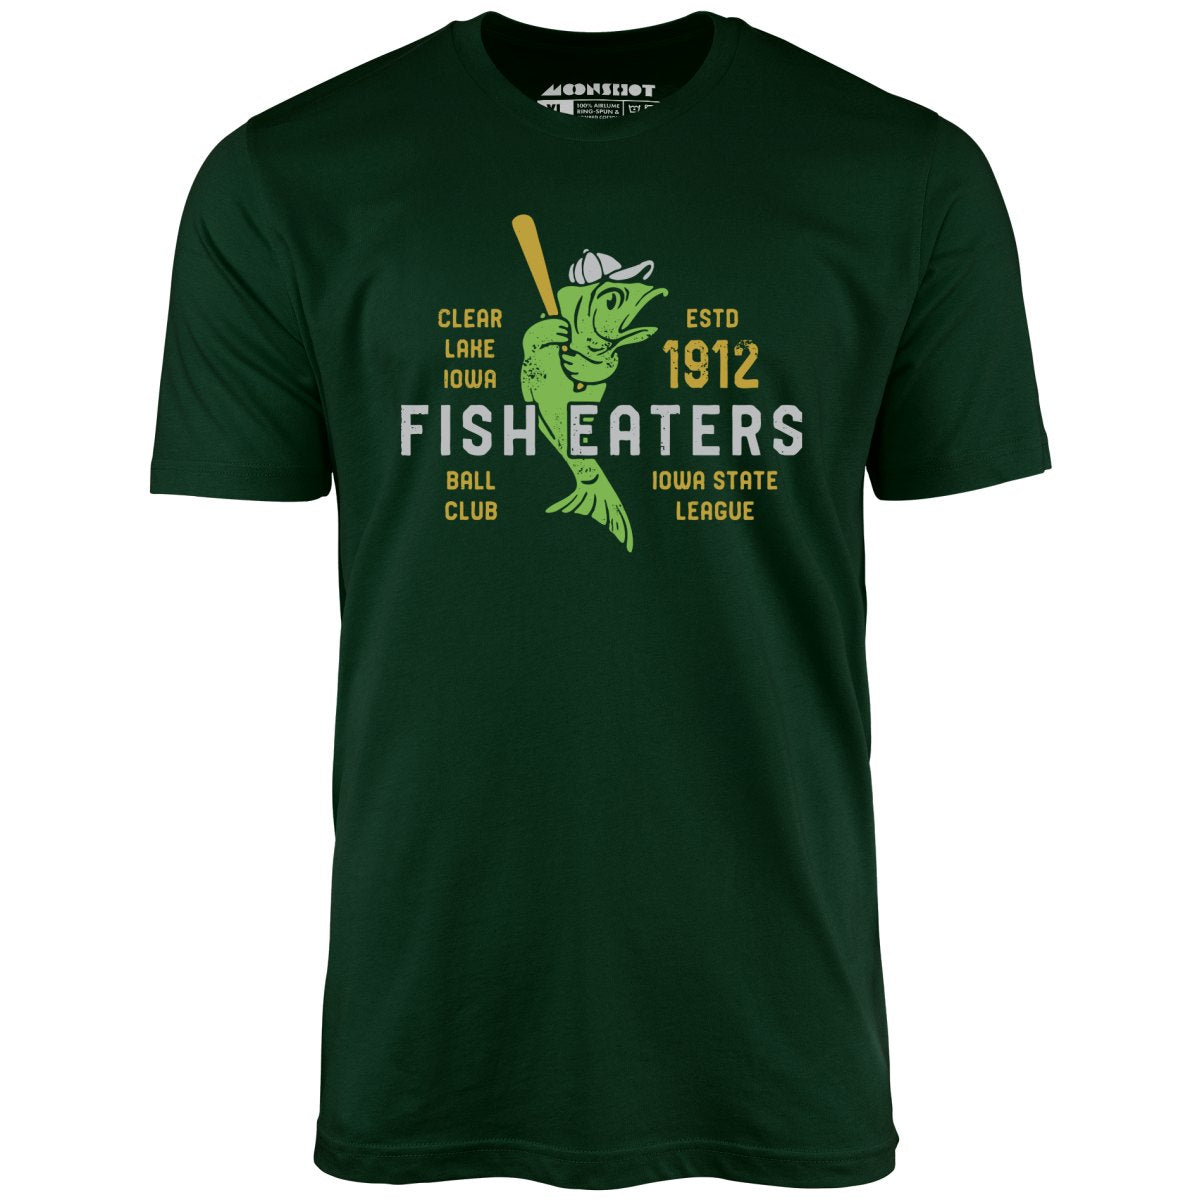 Clear Lake Fish Eaters - Iowa - Vintage Defunct Baseball Teams - unisex T-Shirt Forest Green / 5XL